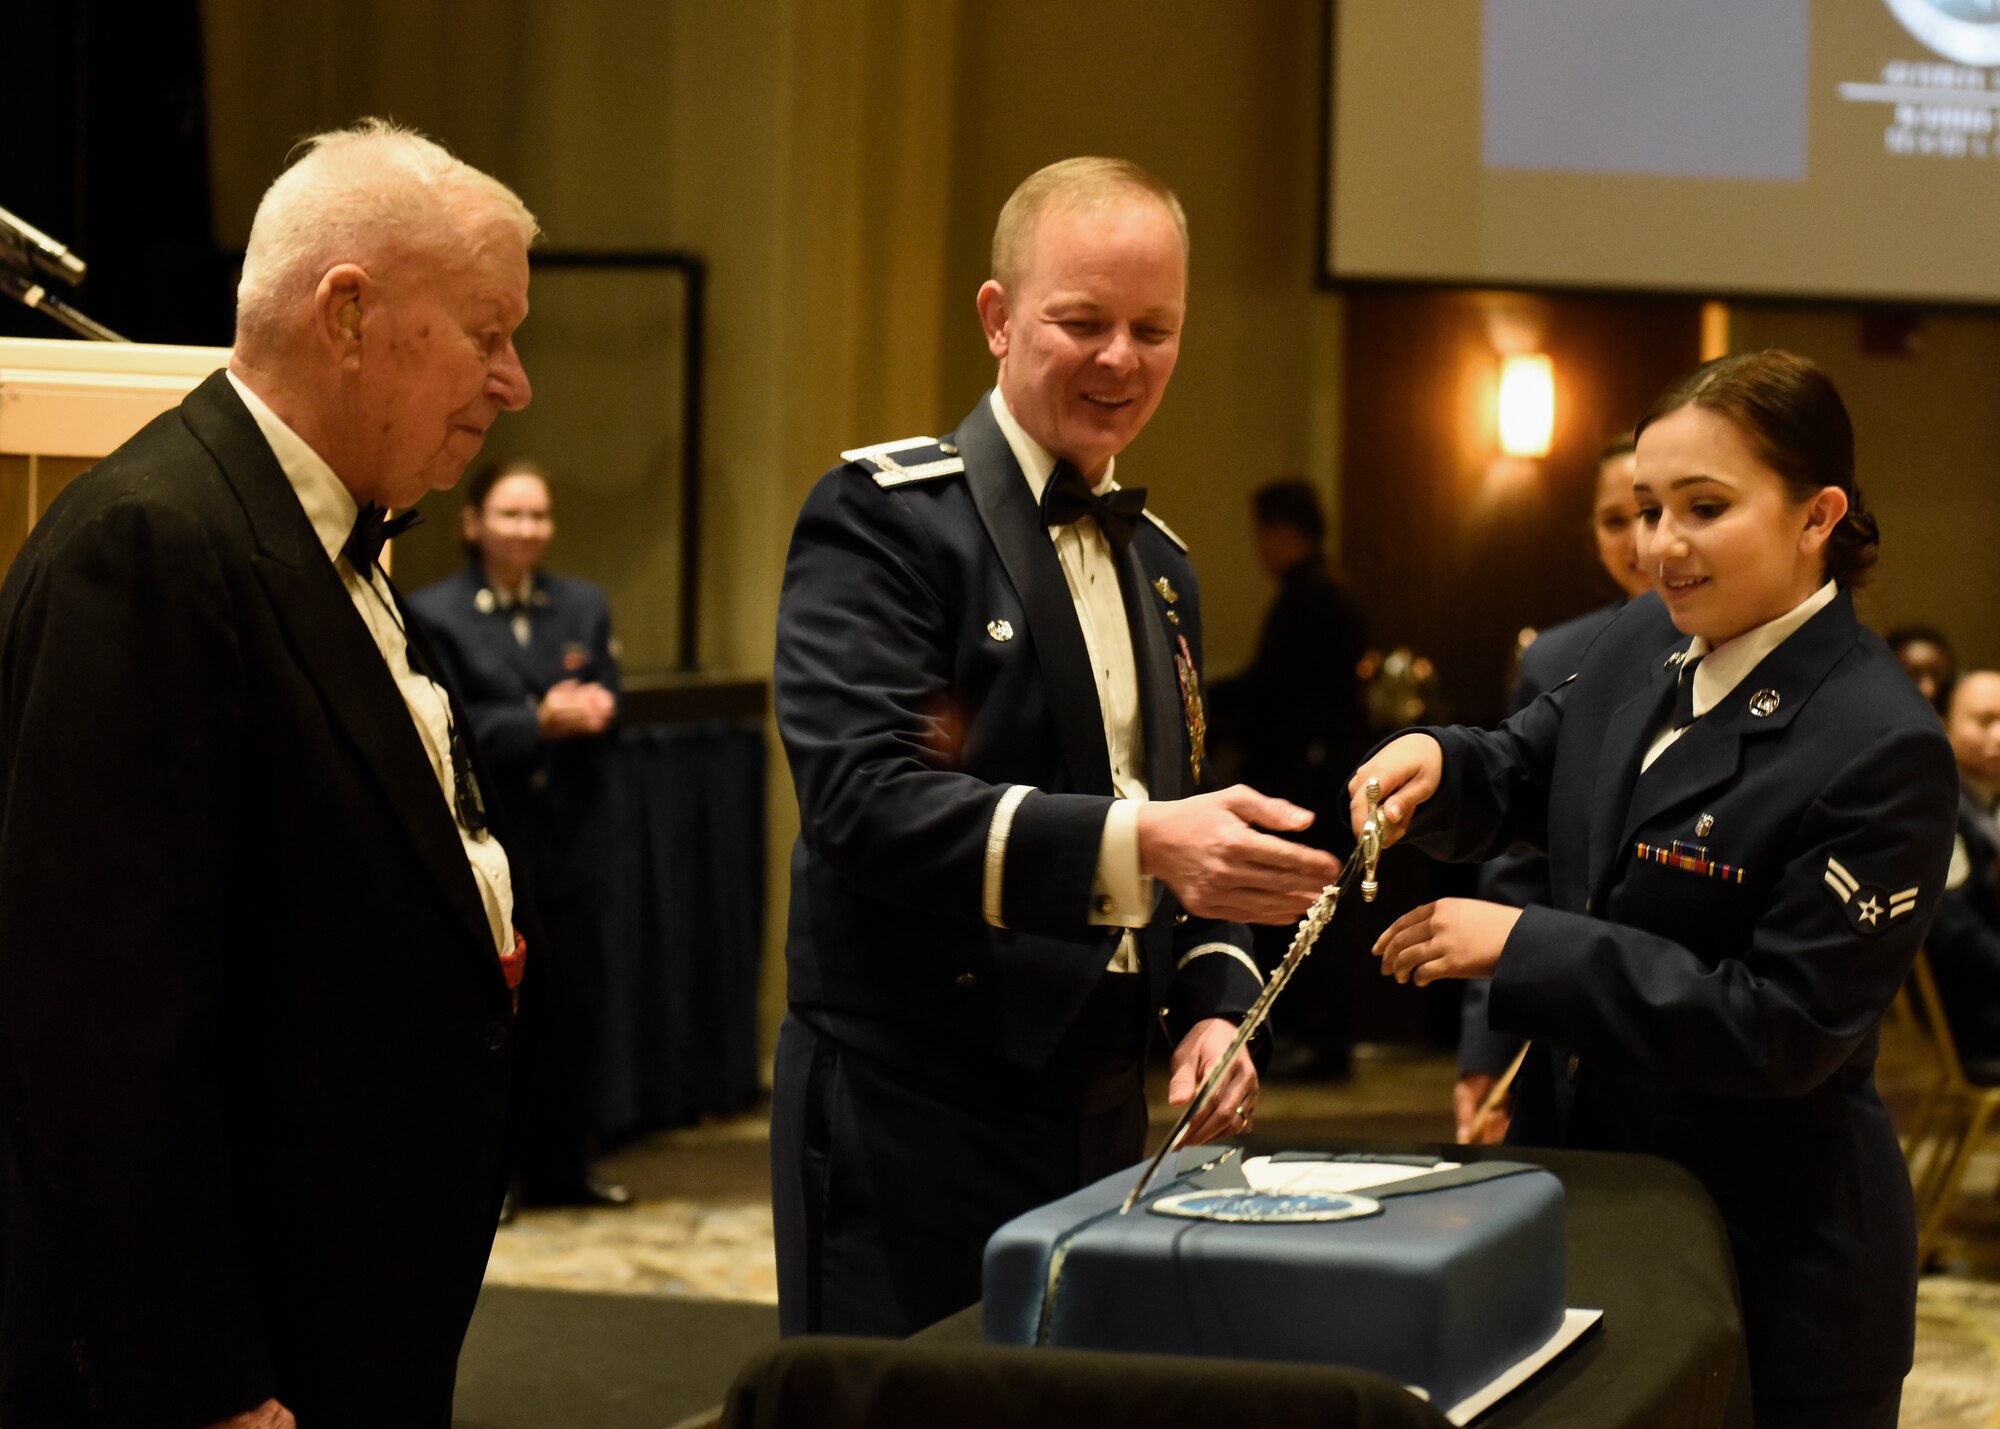 Col. Derek Salmi, 92nd Air Refueling Wing commander, assists the youngest attending Airman during a cake cutting ceremony at Fairchild's Air Force Ball at Northern Quest Resort and Casino in Airway Heights, Washington, Sept. 15, 2018. As part of the cake cutting tradition, a ceremonial saber is used to cut the cake by the youngest Airman . (U.S. Air Force photo/Airman 1st Class Lawrence Sena)